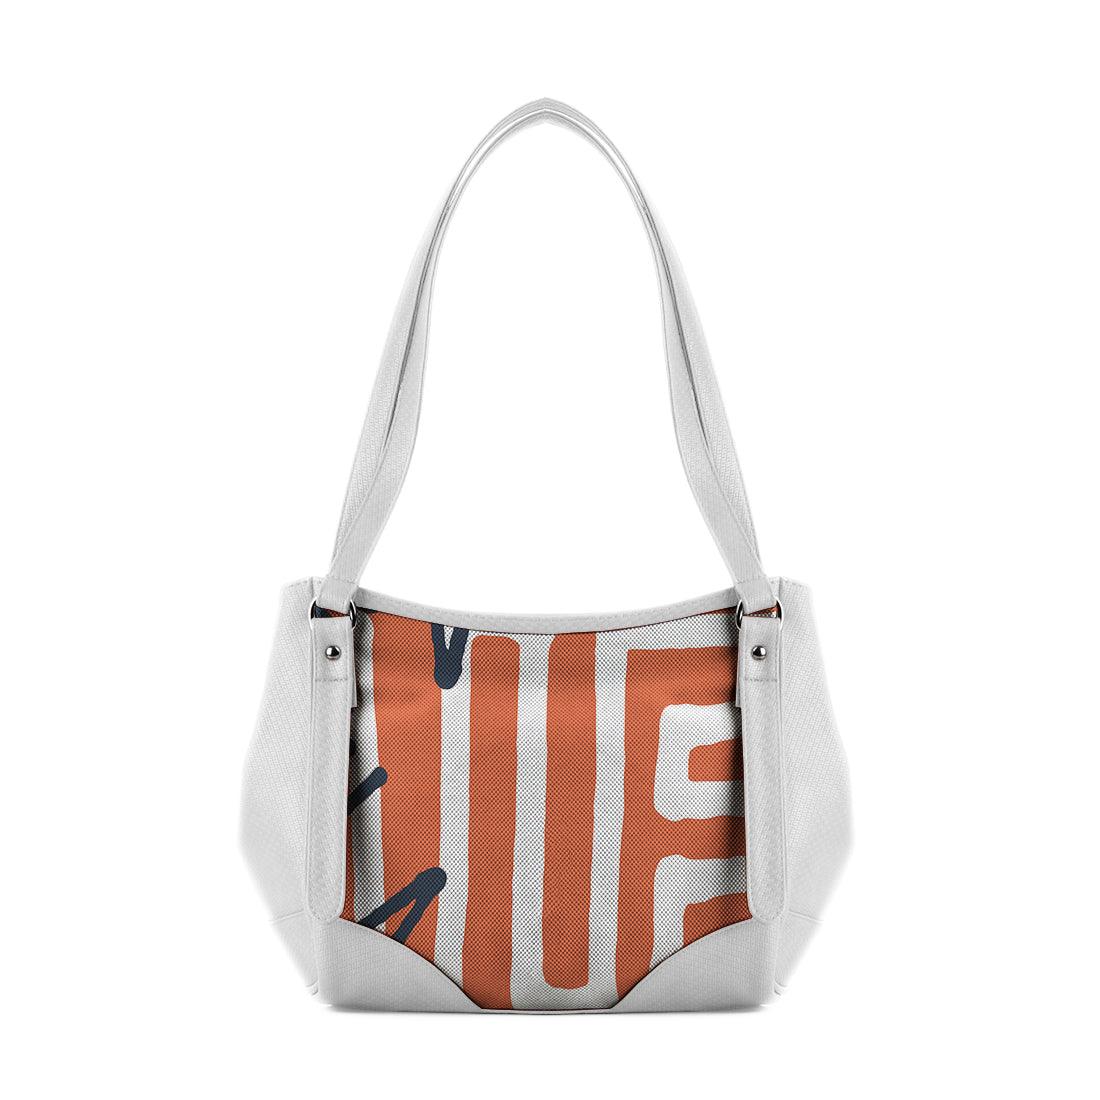 White Leather Tote Bag We - CANVAEGYPT